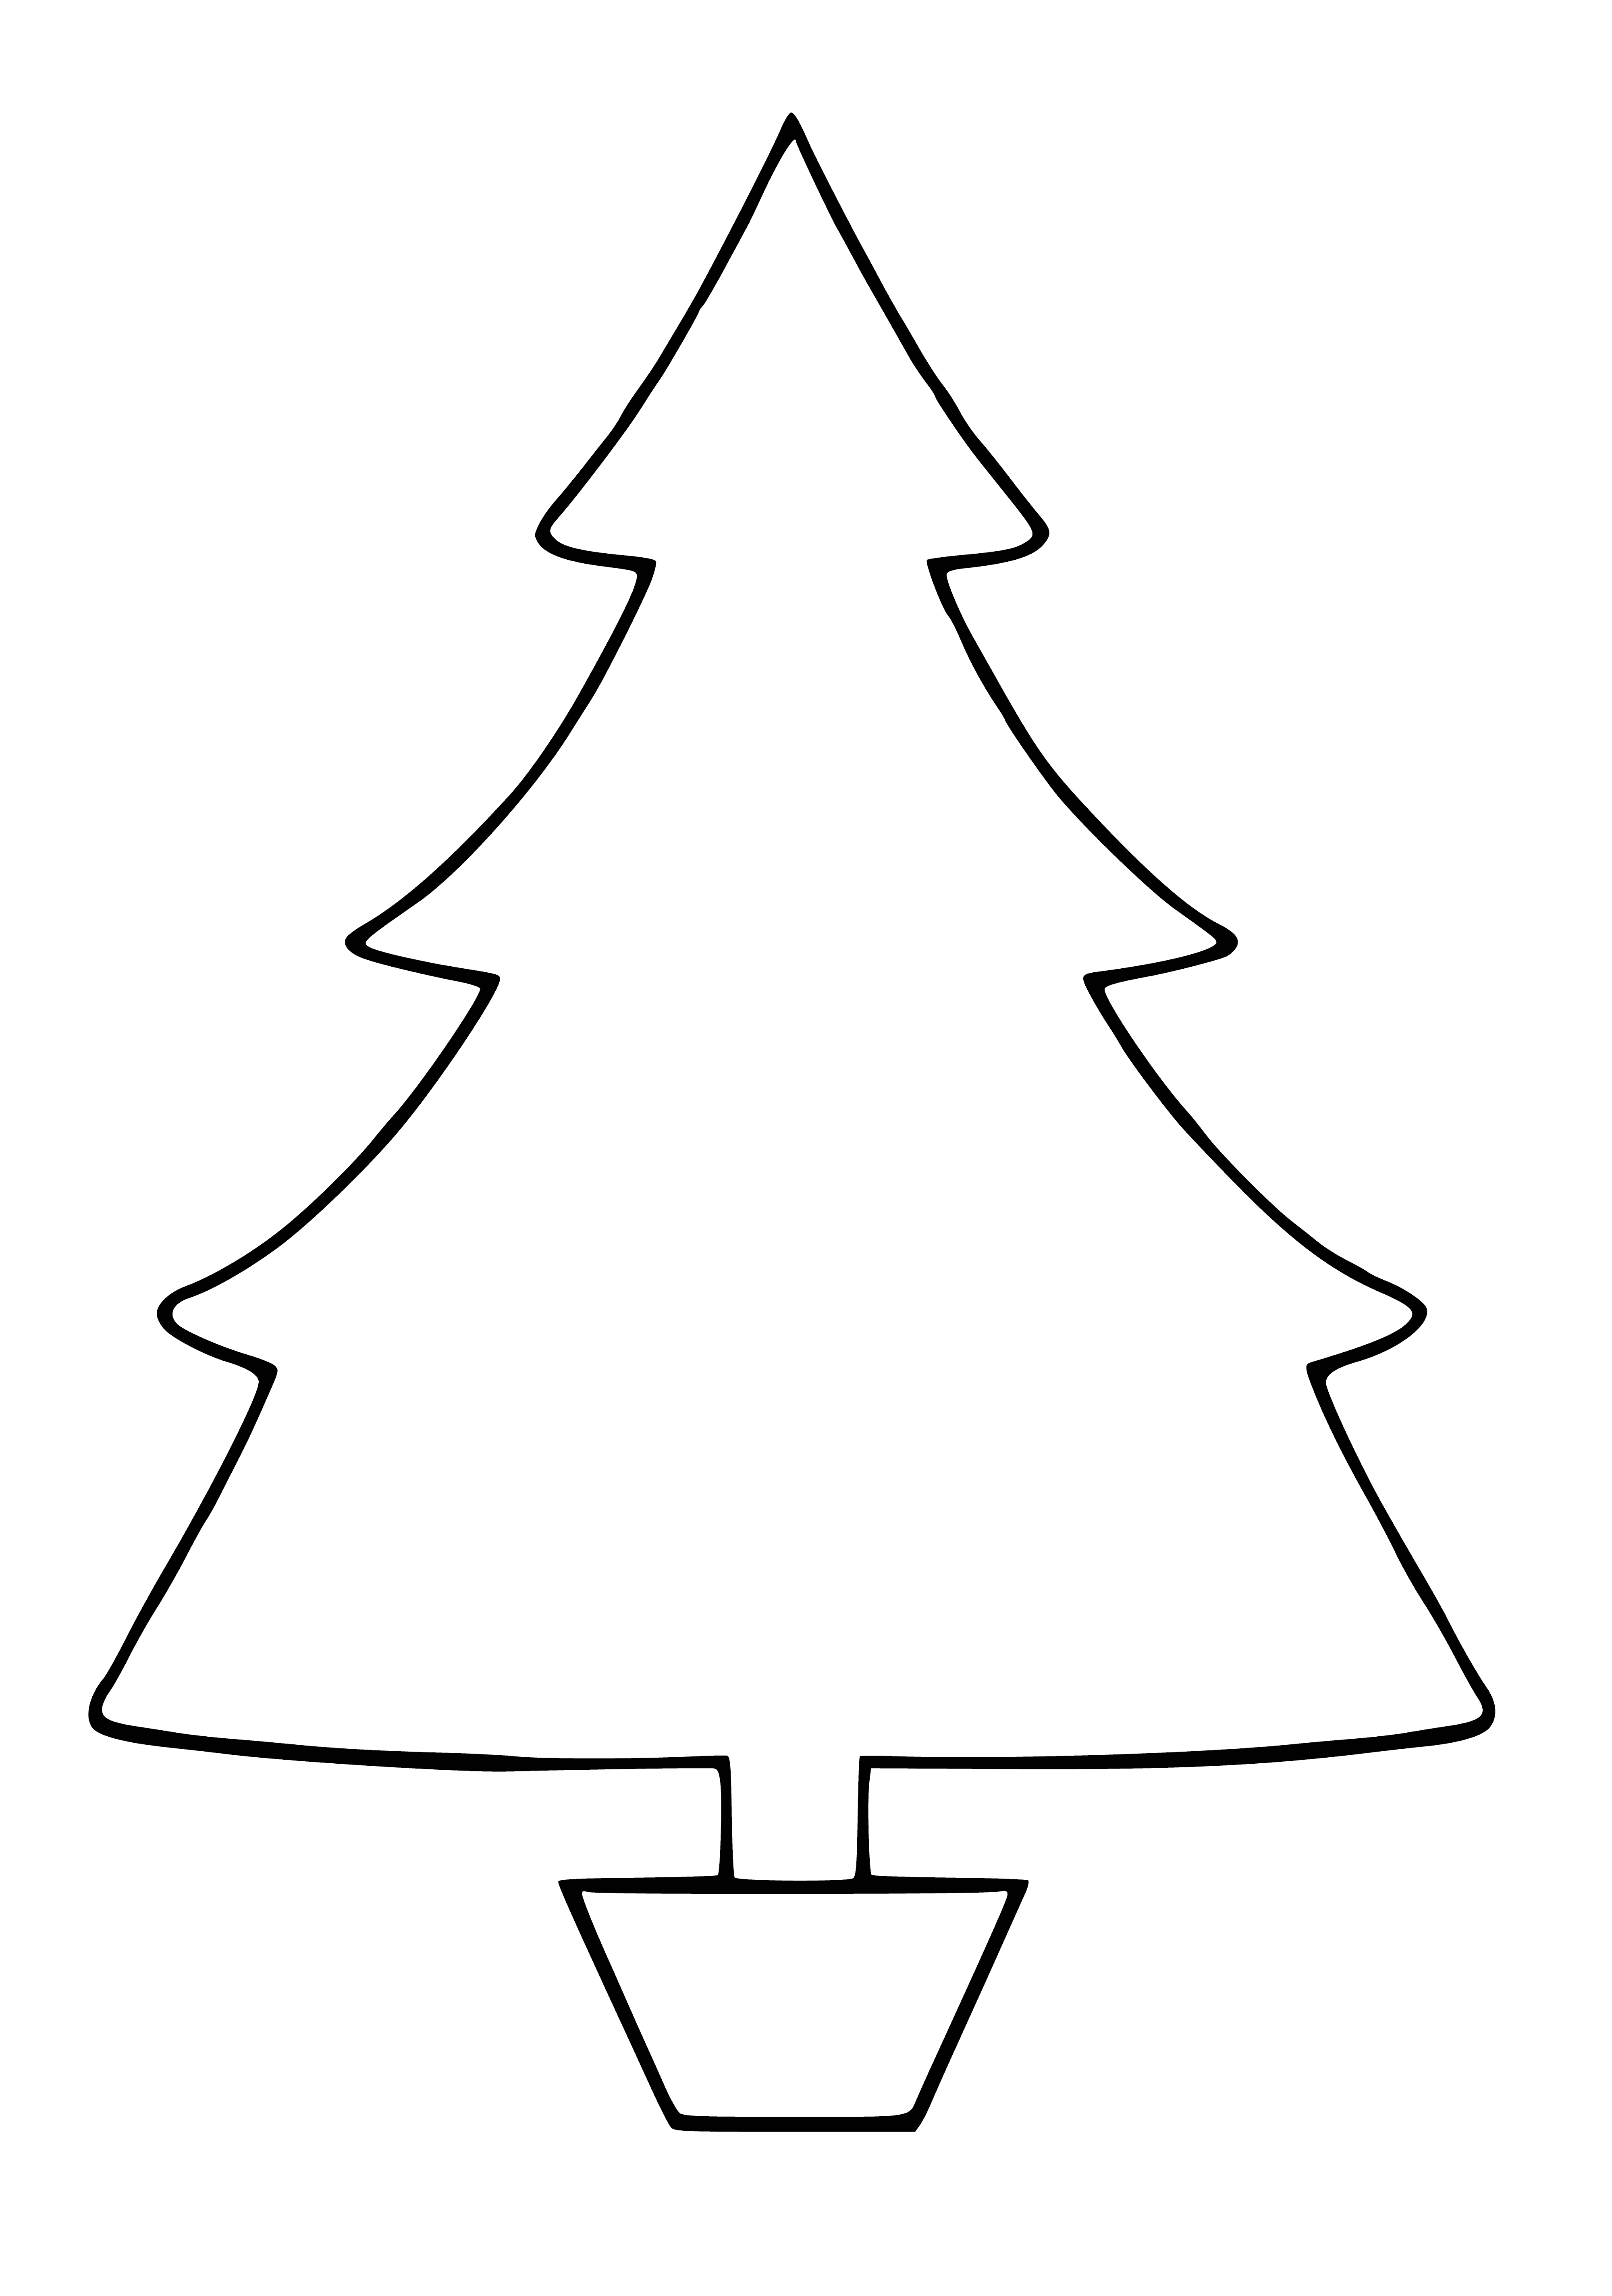 Coloring pages of jolly Christmas trees decorated with balls, garland, and presents; night sky with stars in background.